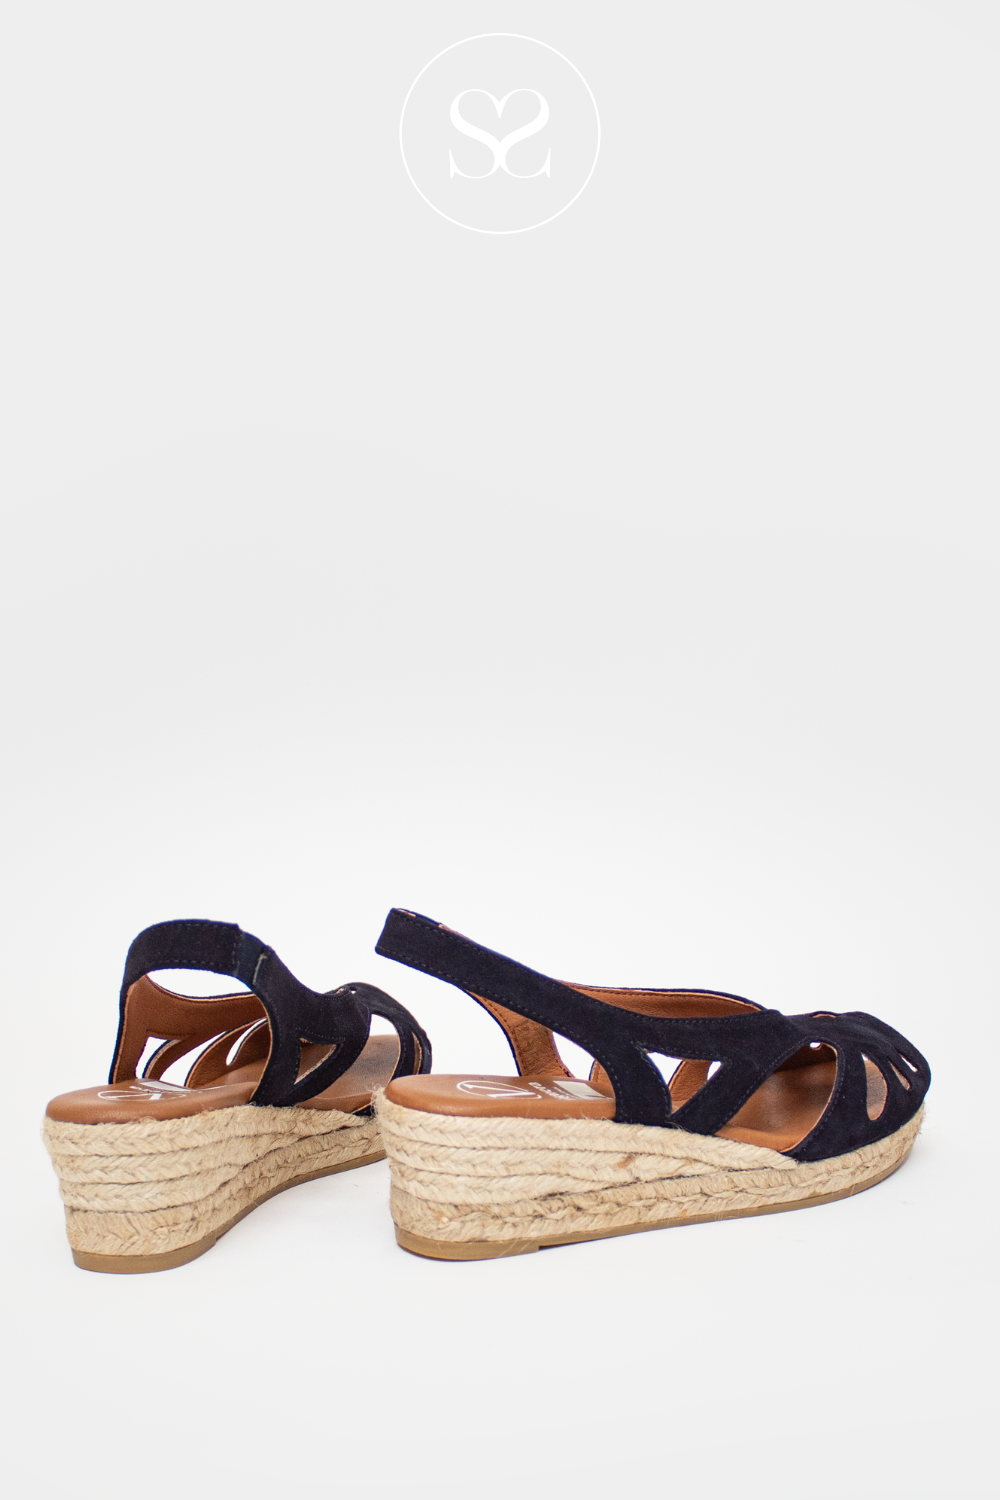 COMFORTABLE NAVY ESPADRILLE WEDGES FROM VIGUERA IRELAND